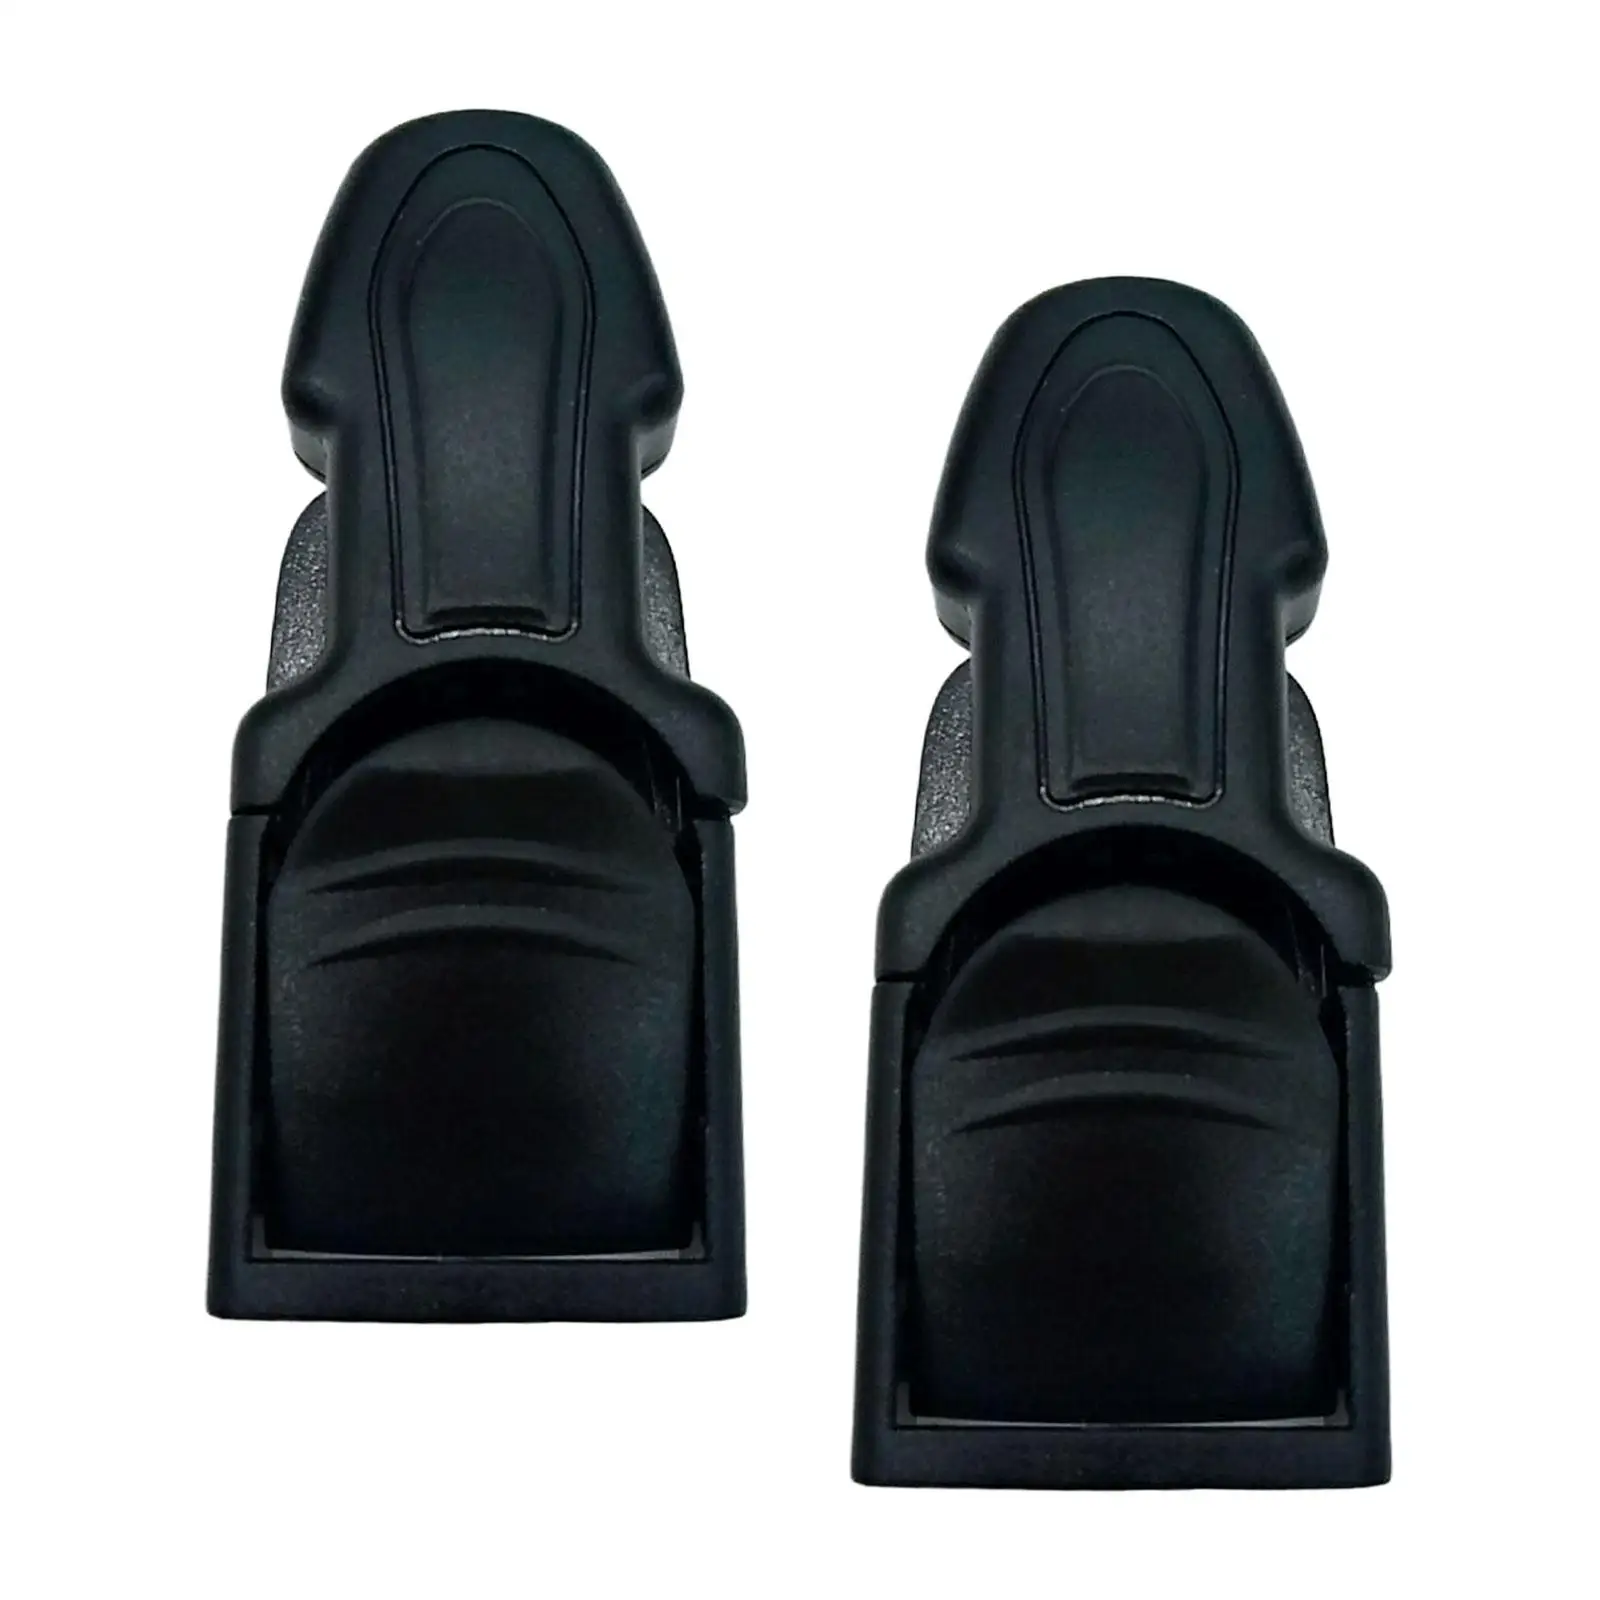 2Pcs Scuba Diving Fin Strap Quick Release Buckles Replacement Foot Flippers Adjustable Accessories